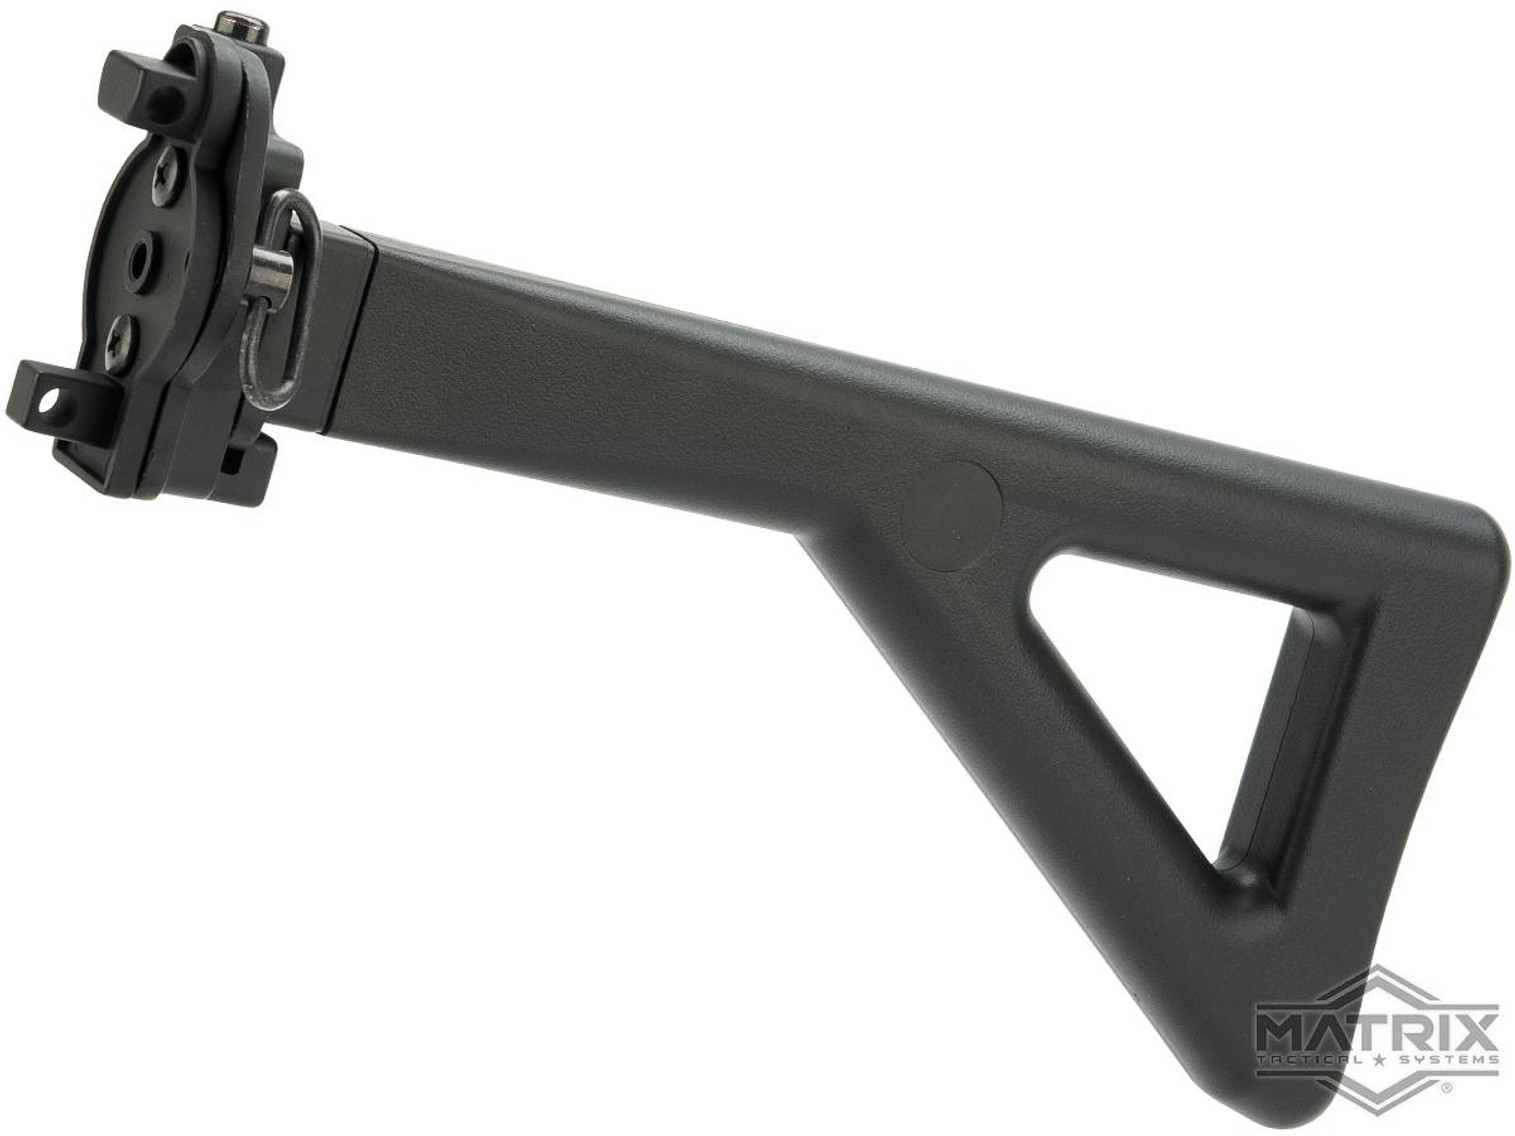 CYMA / Matrix PDW Type Side Folding Stock for Mod5 / MP5K and MP5 PDW Series AEG